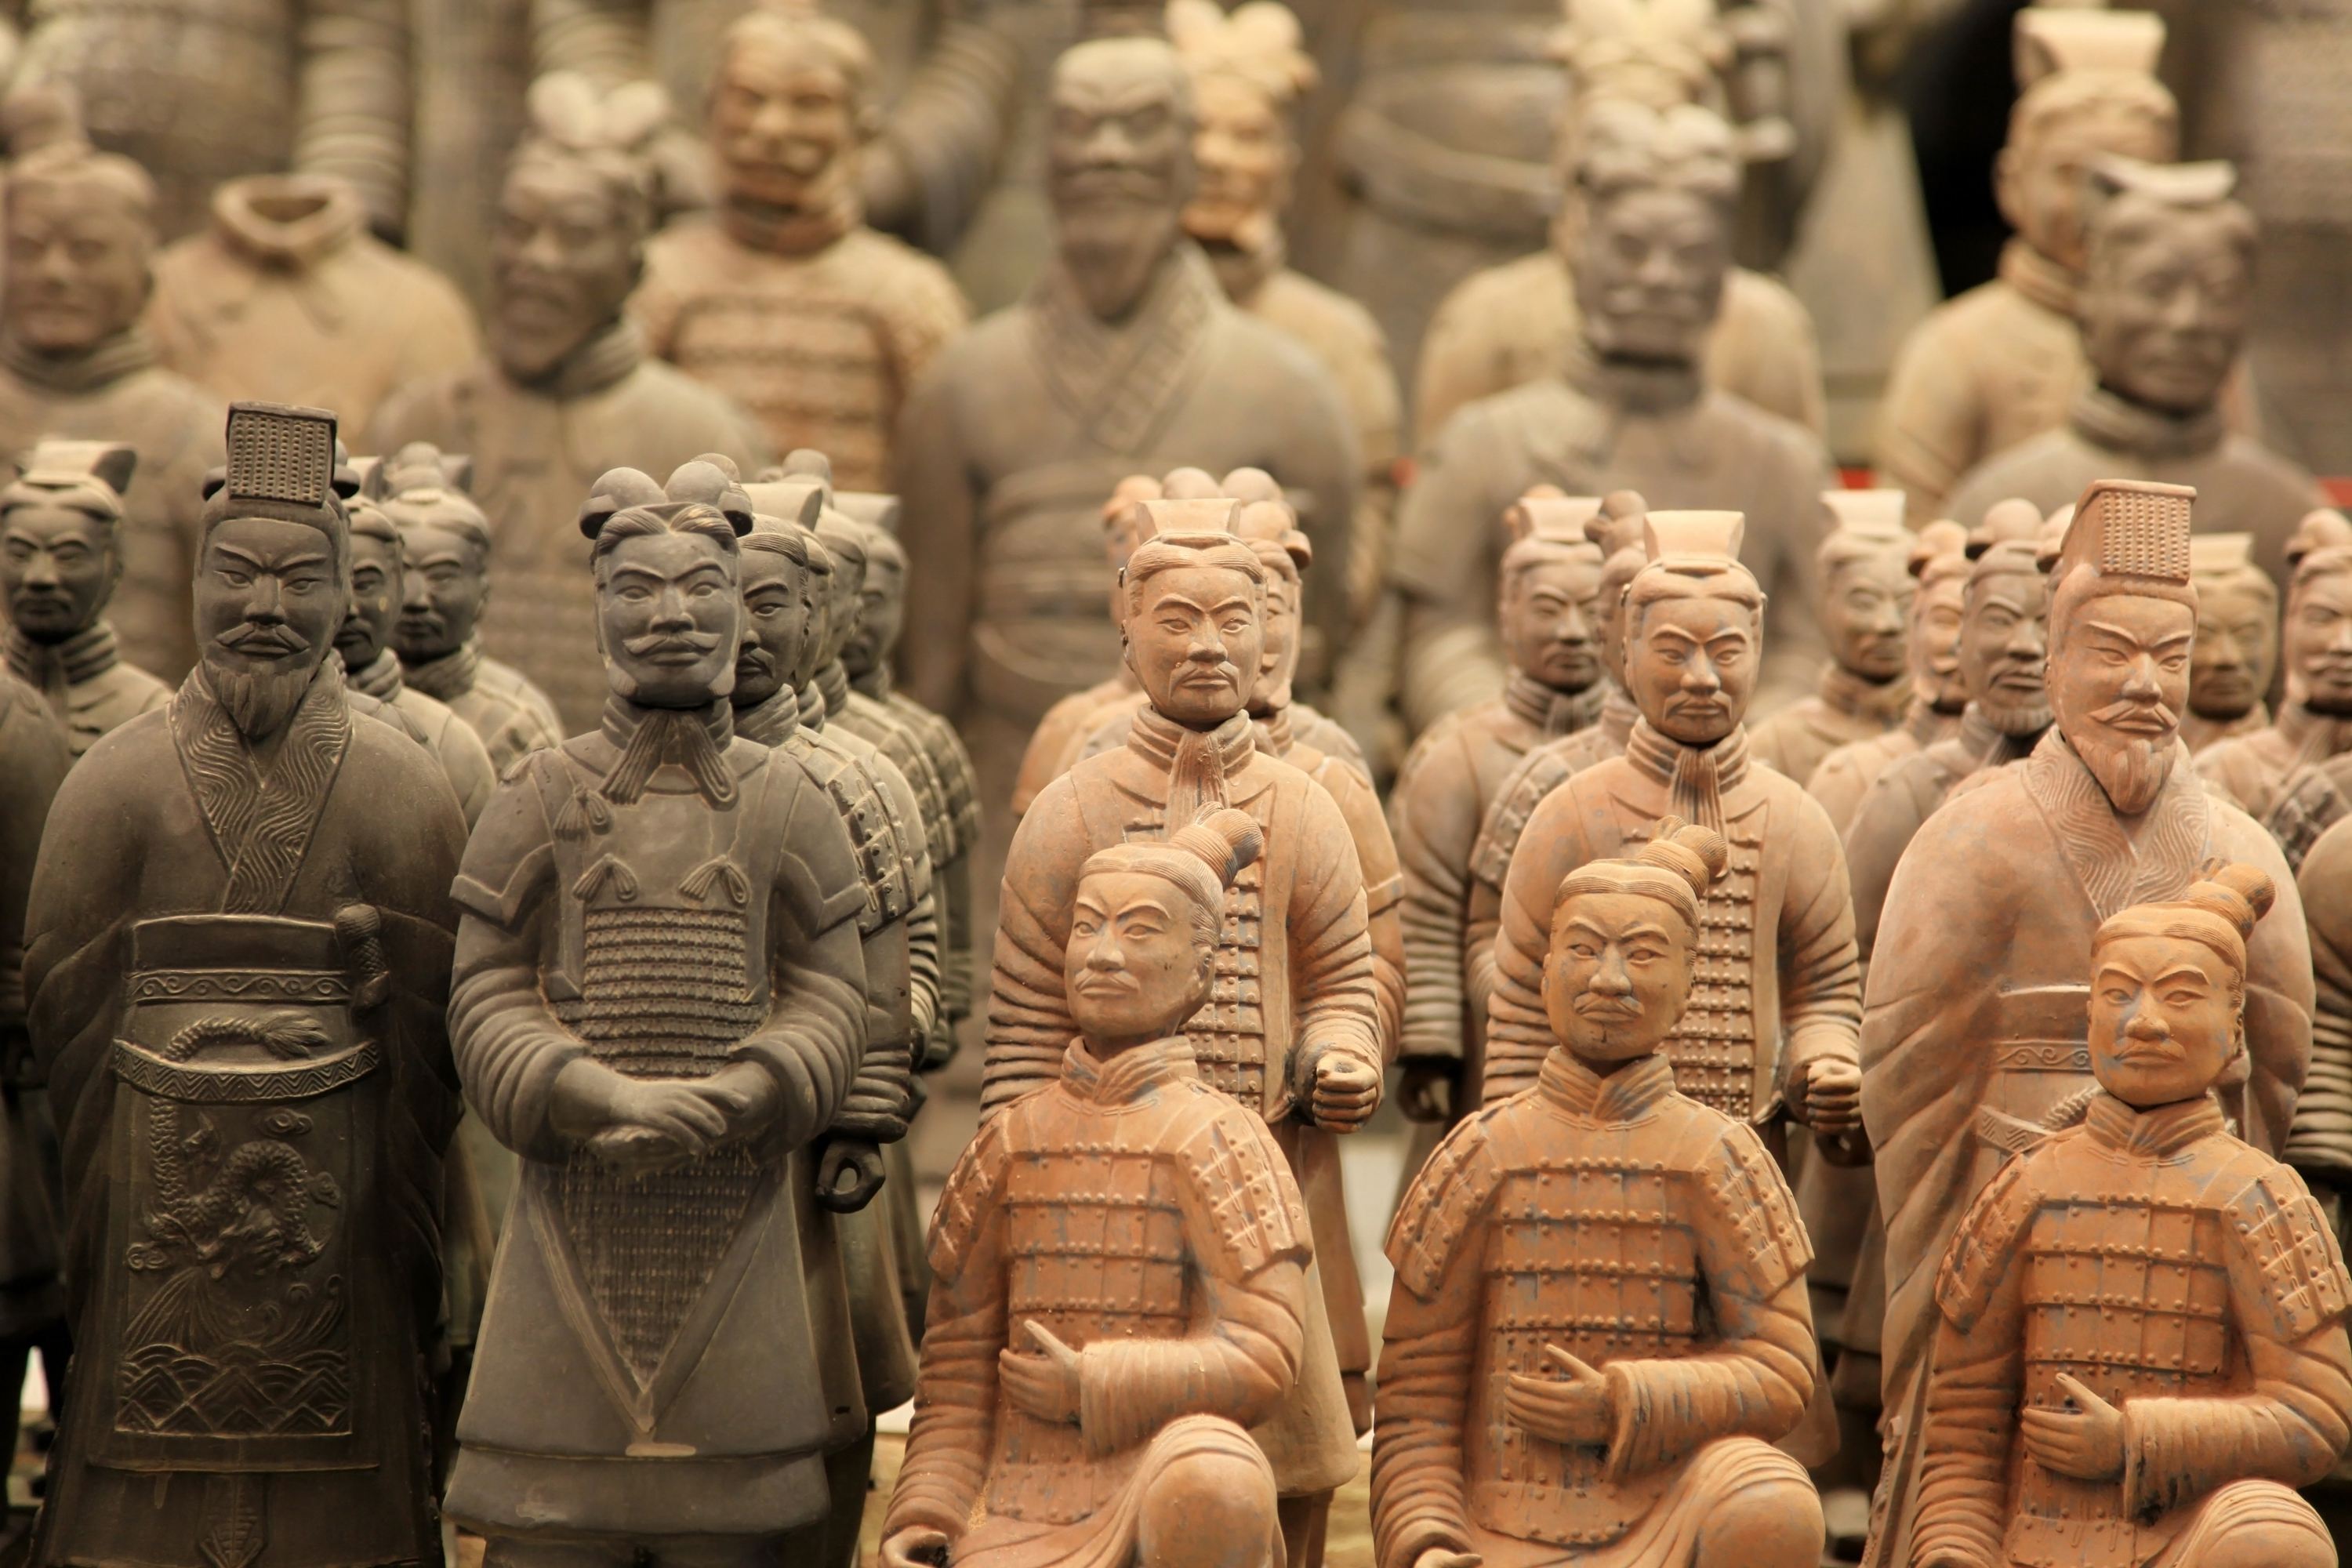 The Museum of Terra-Cotta Warriors and Horse